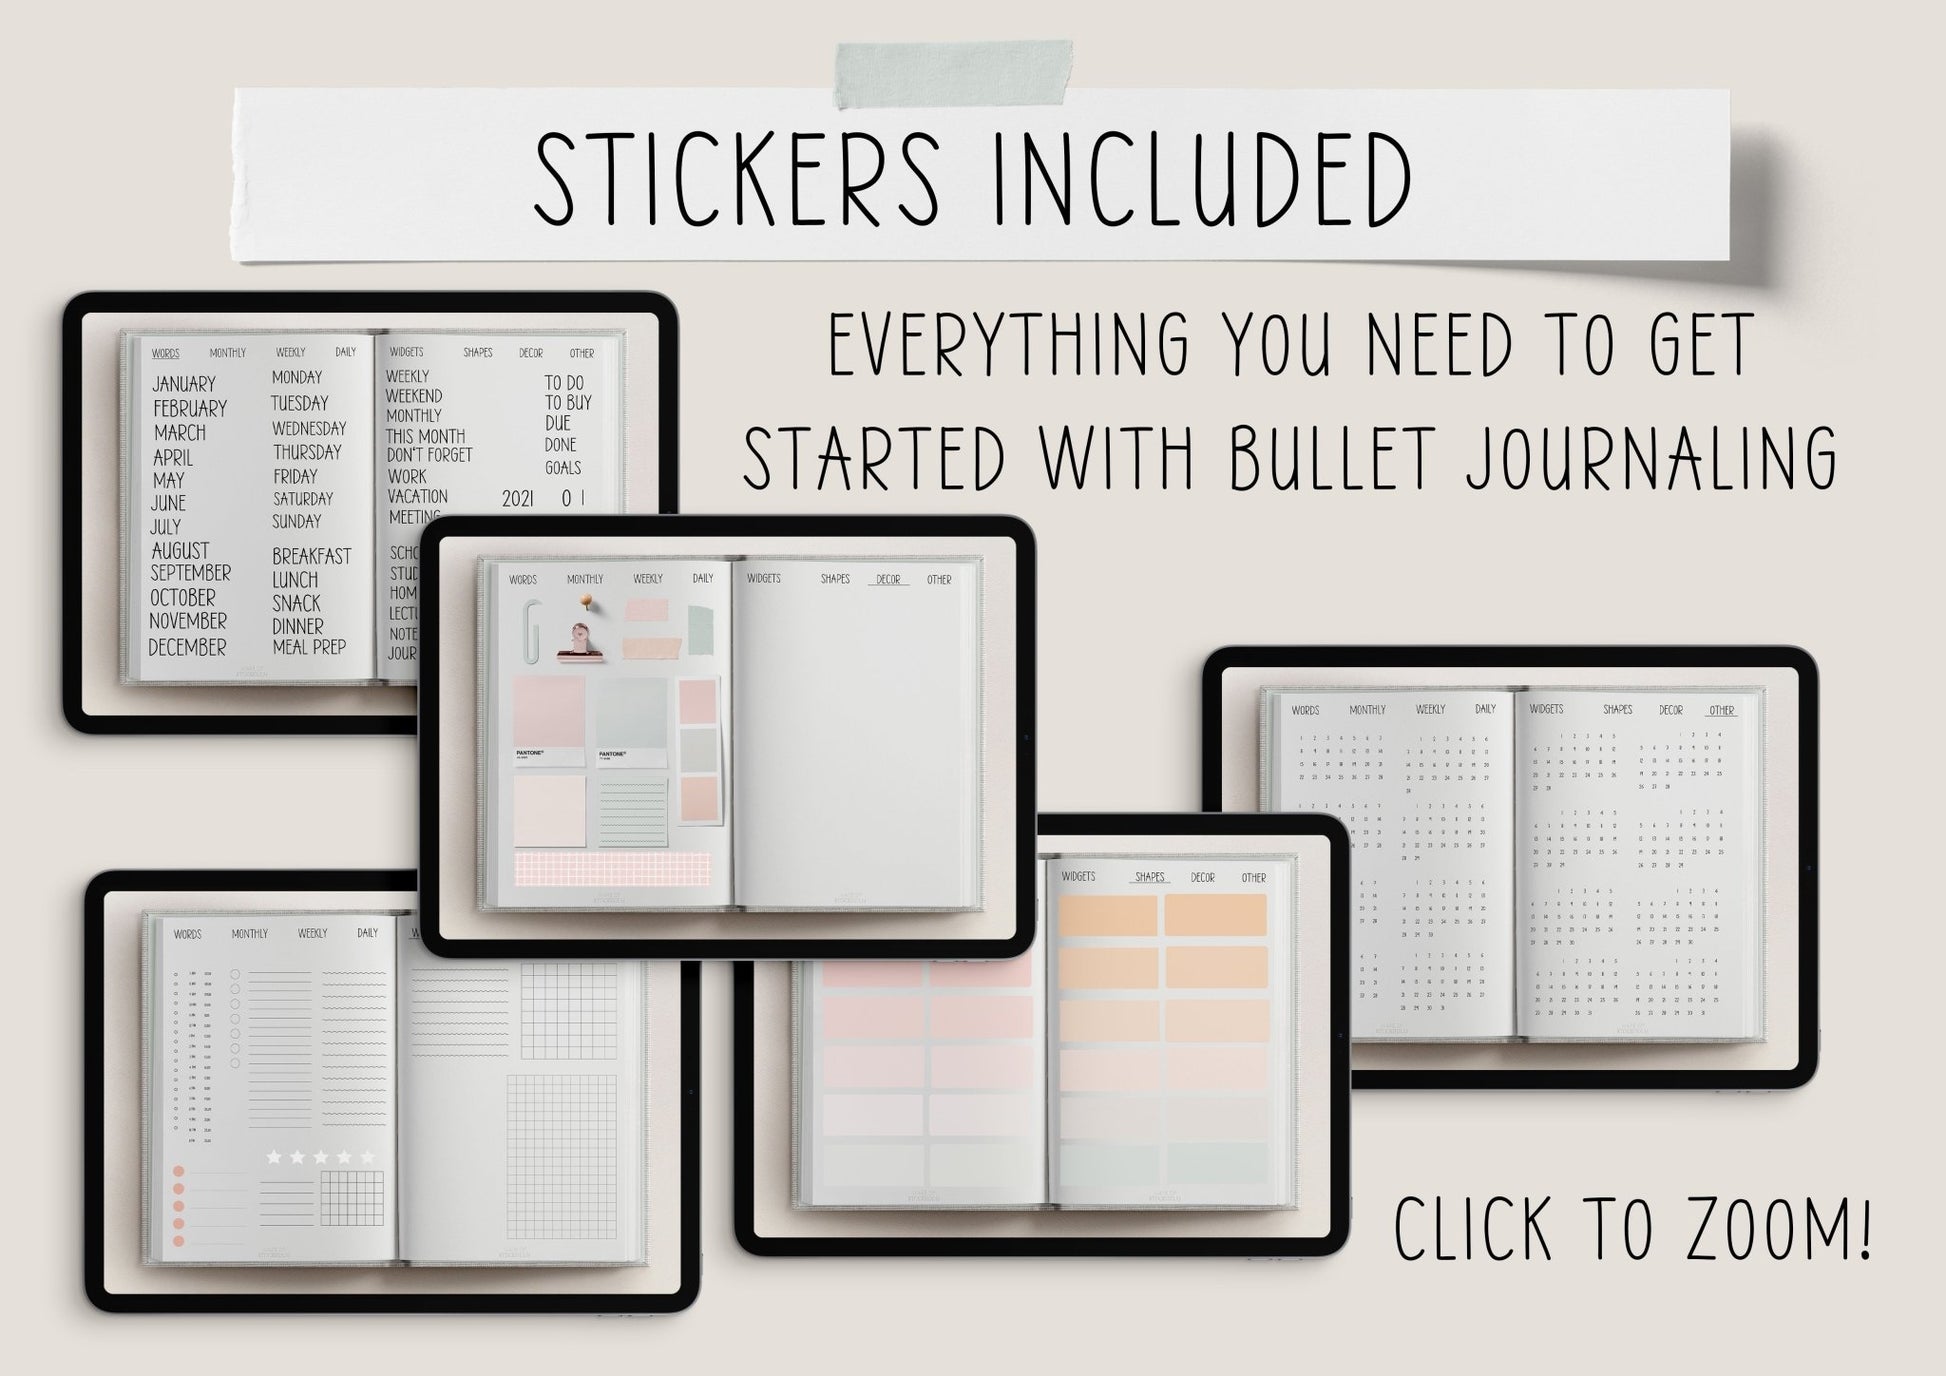 Every Day (1-31) Stickers for Planners & Bullet Journals - Chocolate Musings